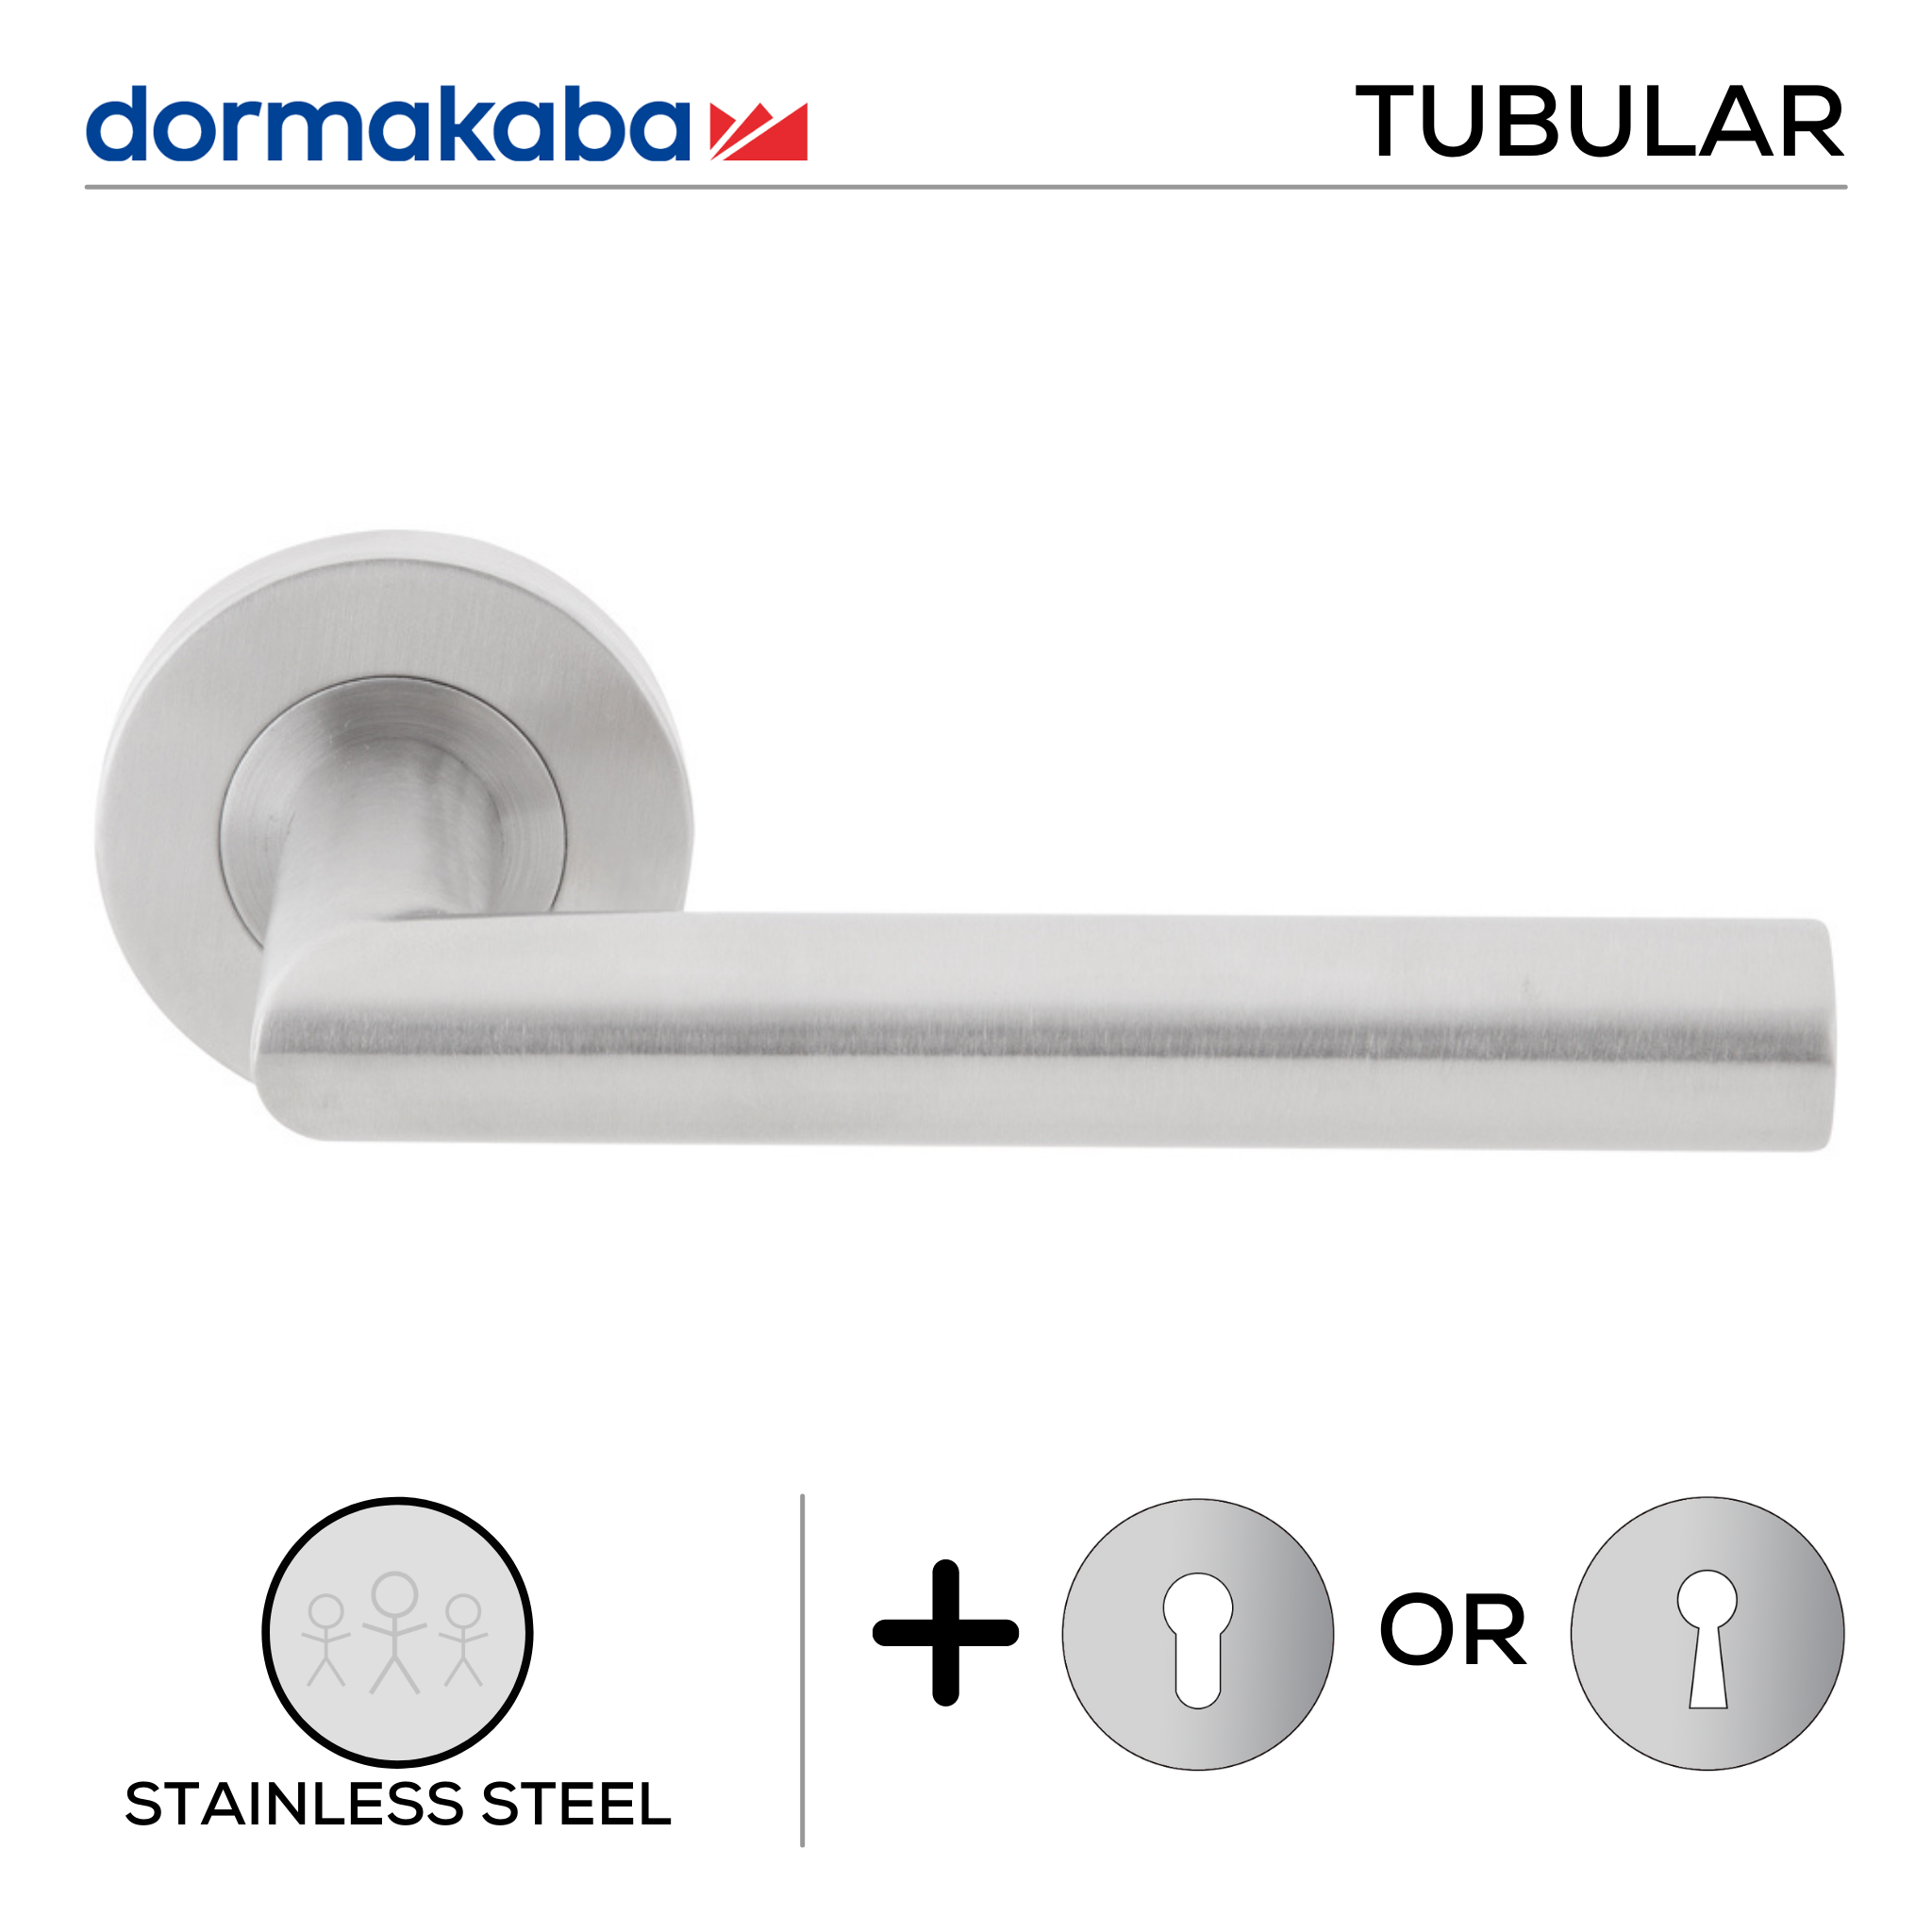 TH 125, Lever Handles, Tubular, On Round Rose, With Escutcheons, 143mm (l), Stainless Steel, DORMAKABA